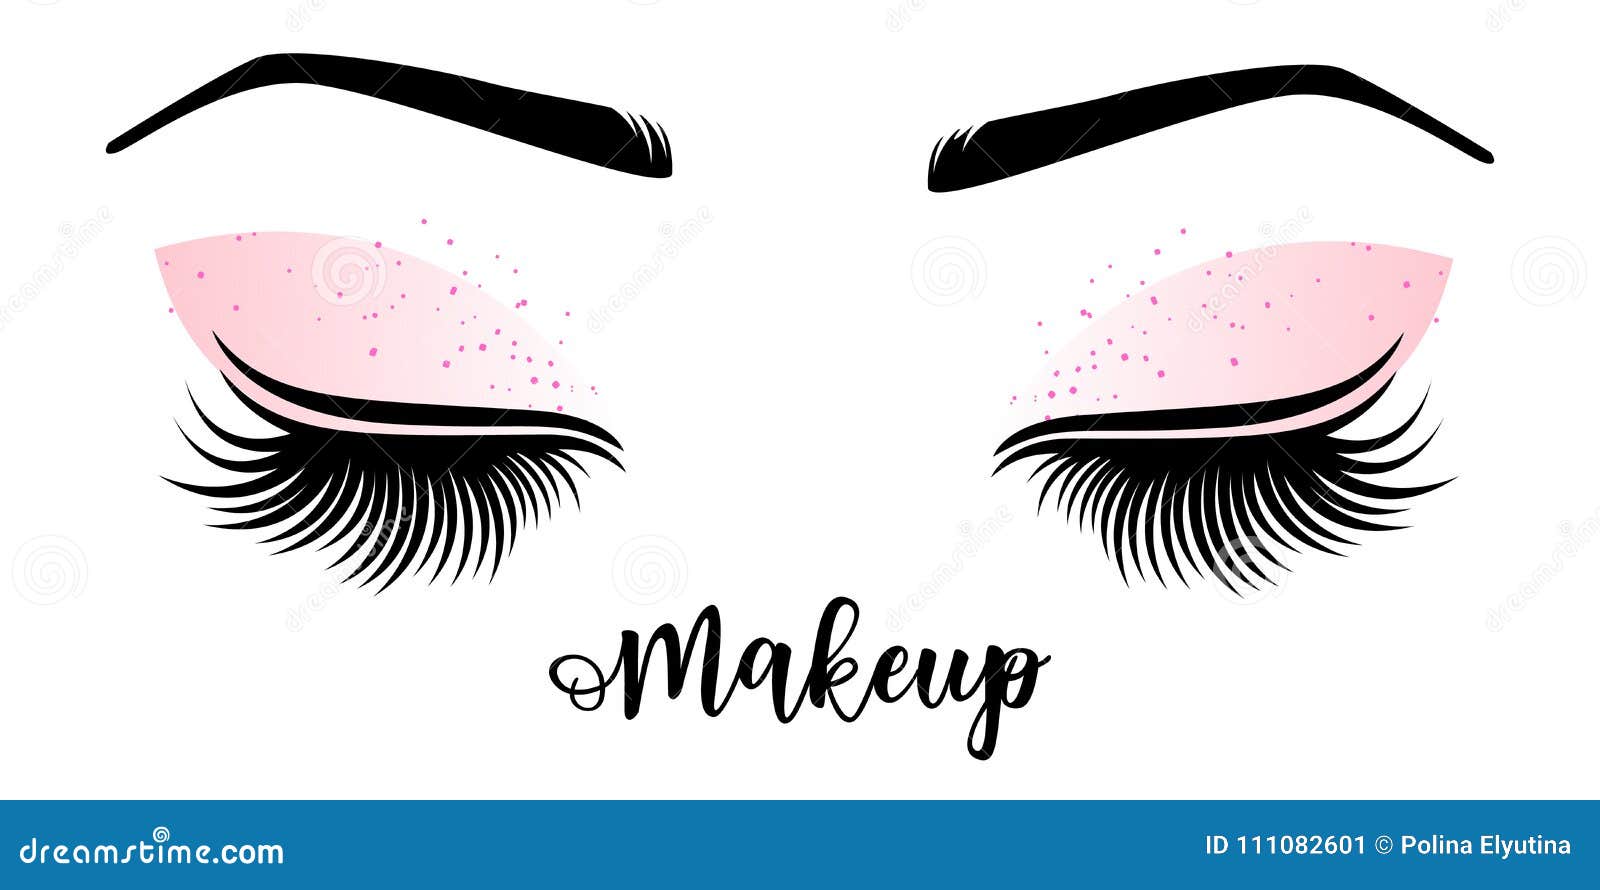 makeup master logo.   of lashes and brow.